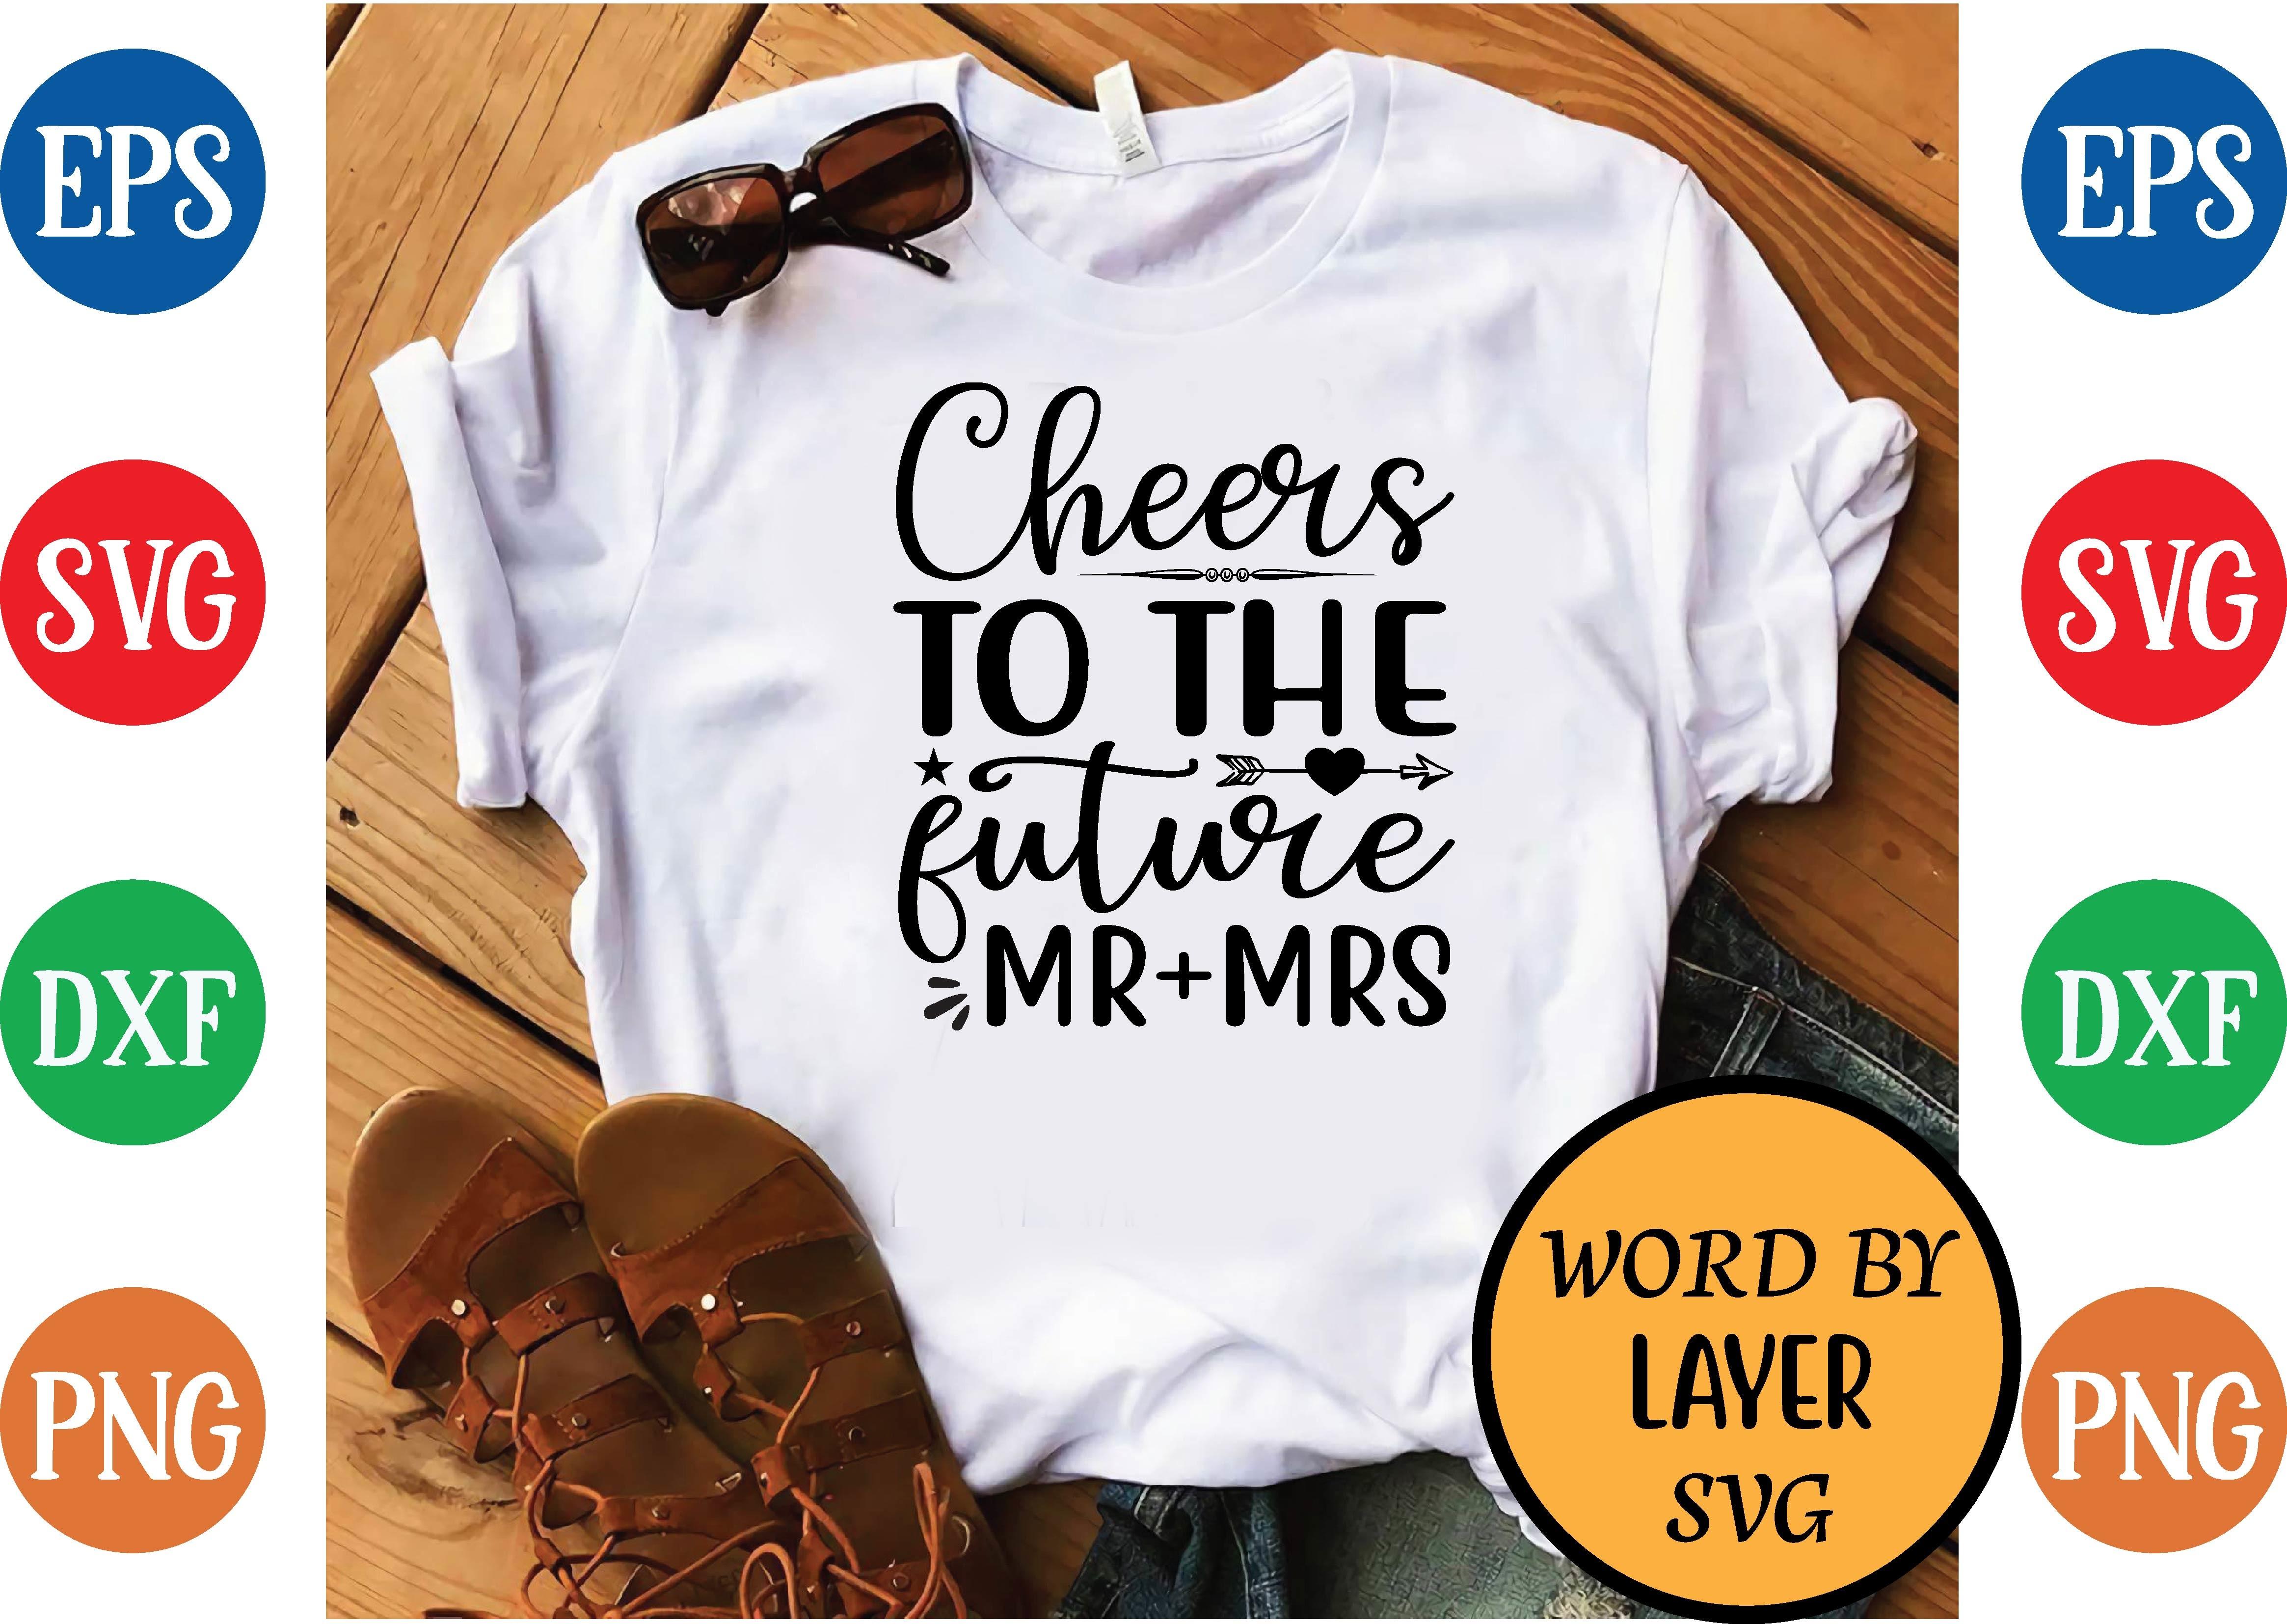 Cheers to the Future Mr+mrs Svg Design